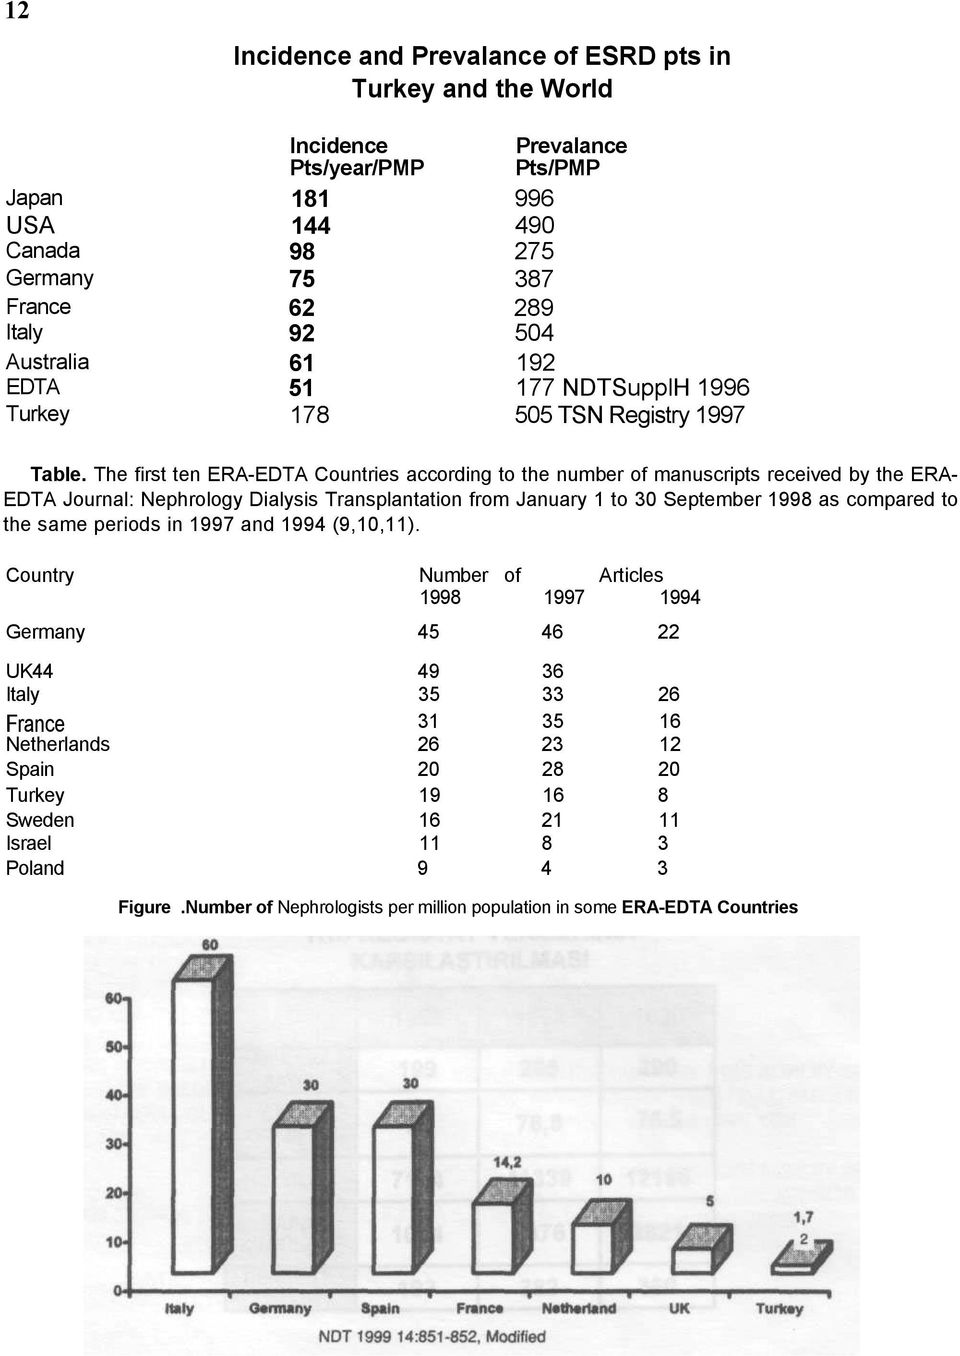 The first ten ERA-EDTA Countries according to the number of manuscripts received by the ERA- EDTA Journal: Nephrology Dialysis Transplantation from January 1 to 30 September 1998 as compared to